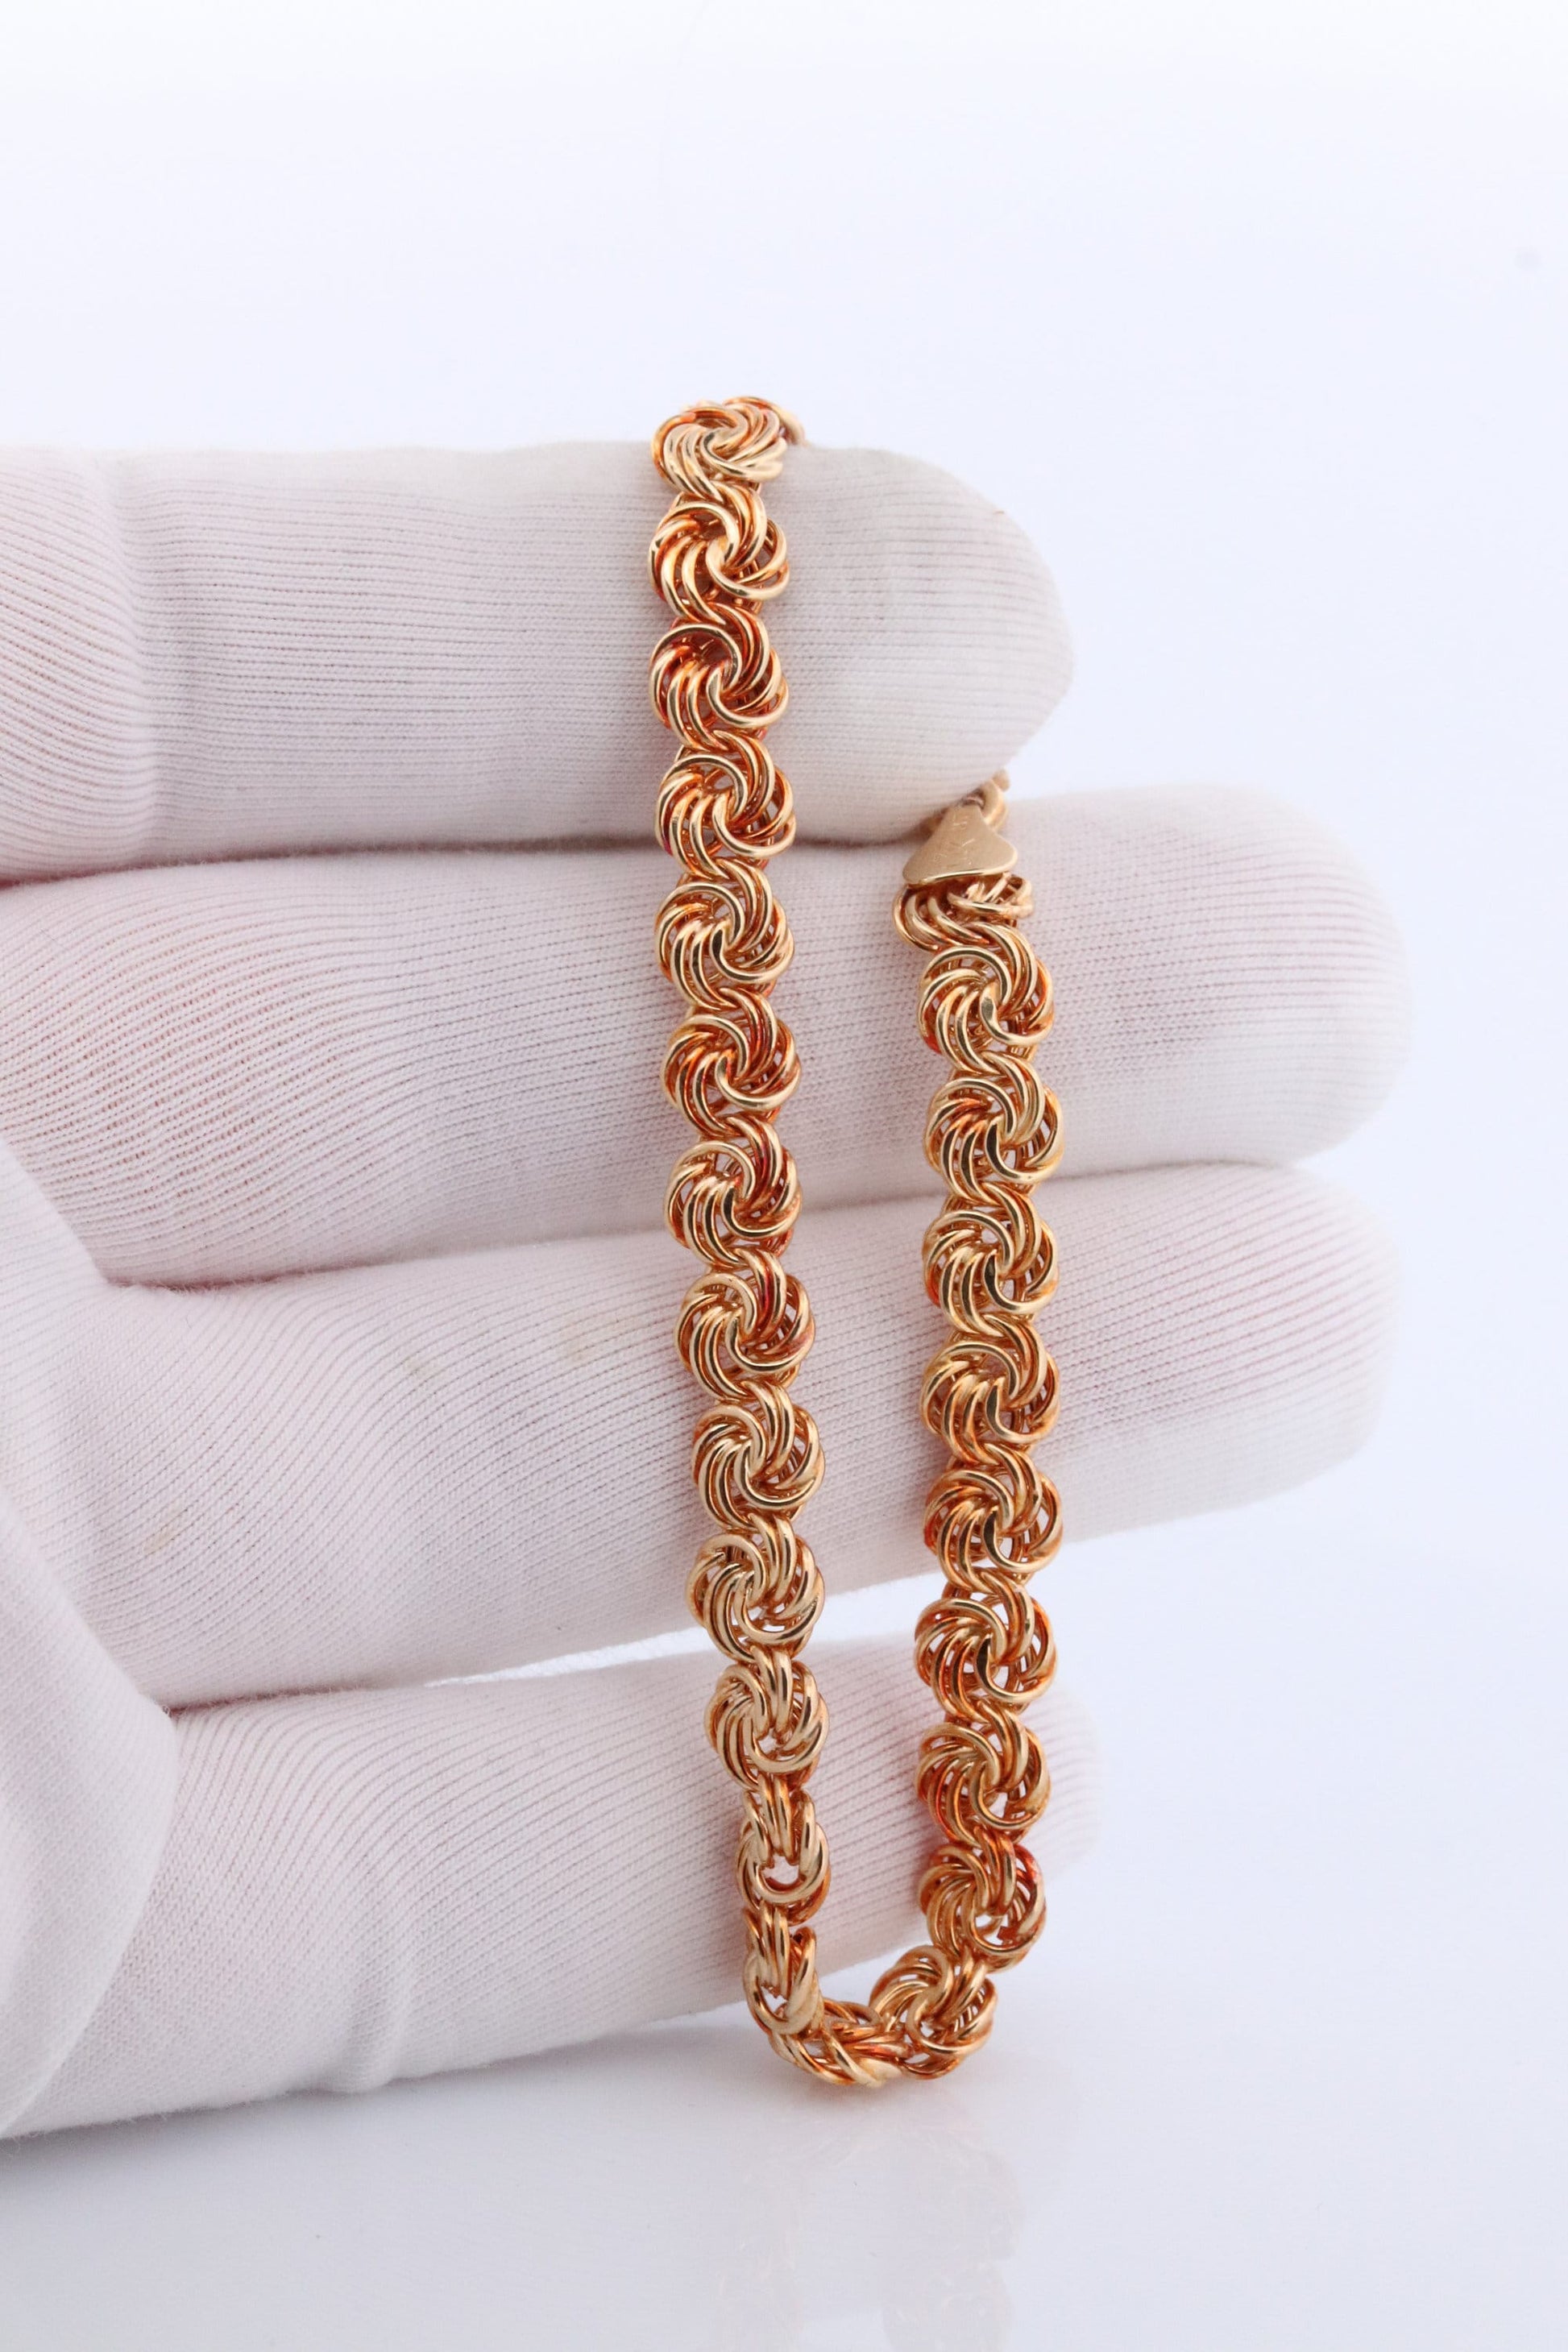 14k Coil Weave Bracelet. Yellow gold Love Knot Weave Round Link Chain Bracelet. High Quality ITALY wide bracelet.